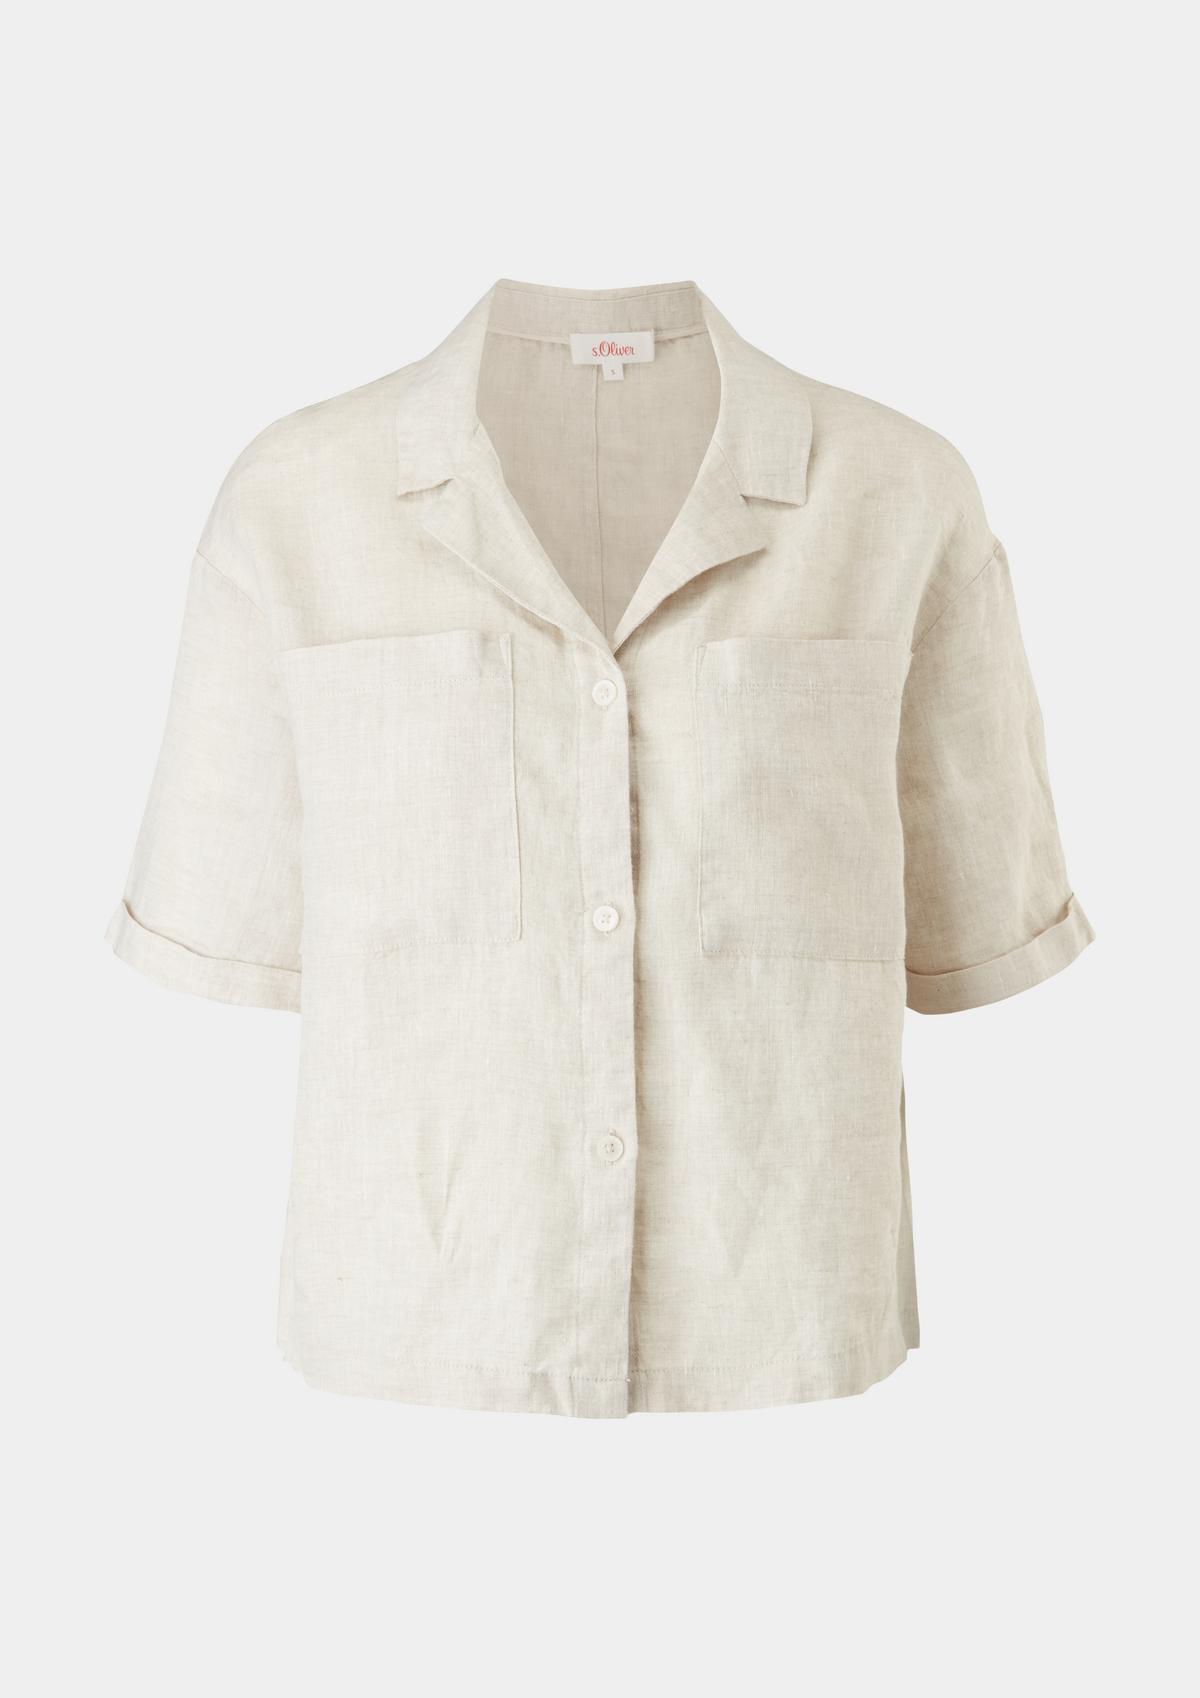 s.Oliver Blouse made of natural linen